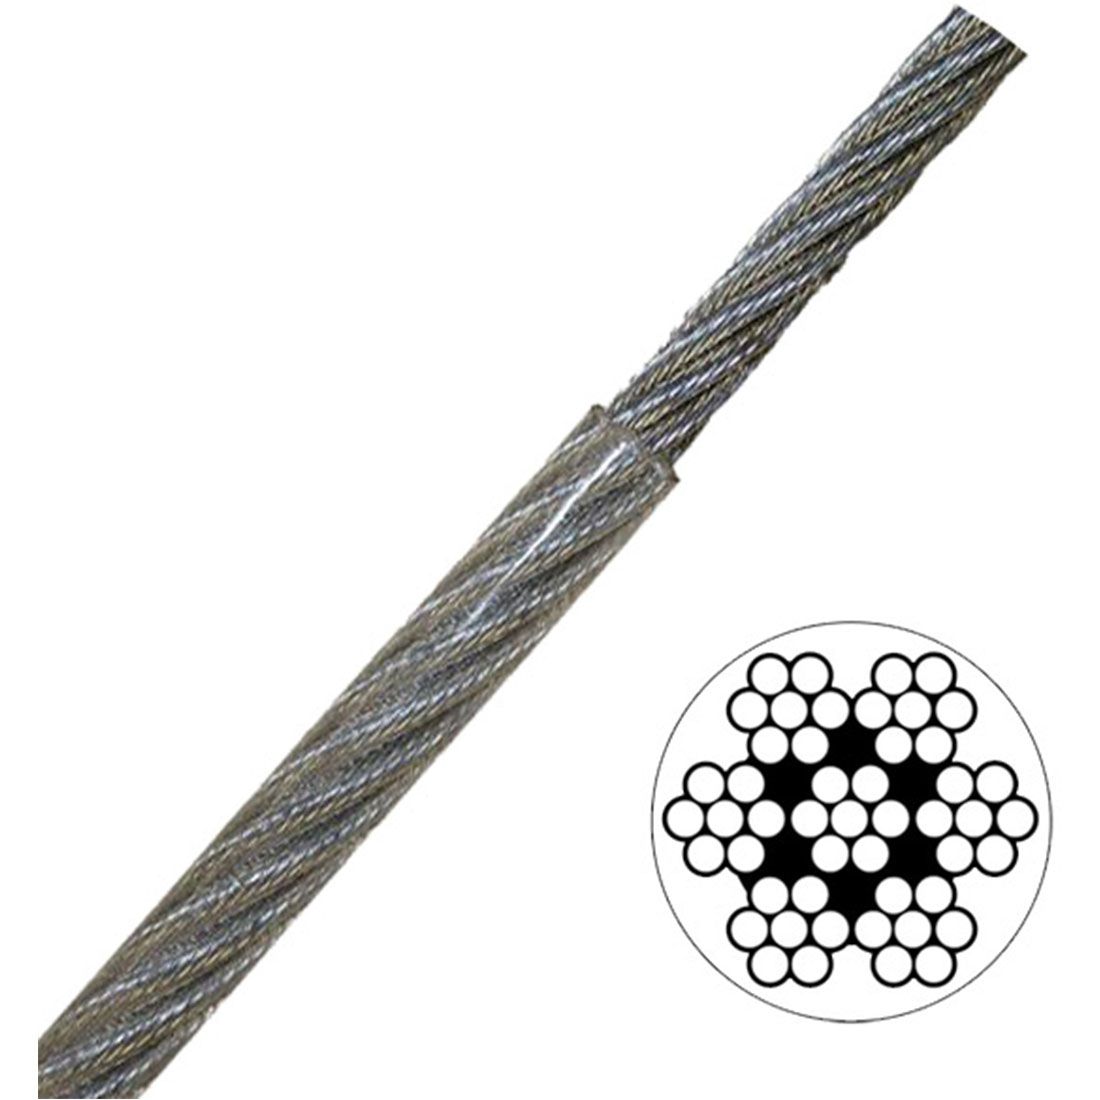 250 5000 ft 2500 Galvanized Aircraft Cable Wire Rope 3/32" 7x7-100 500,1000 